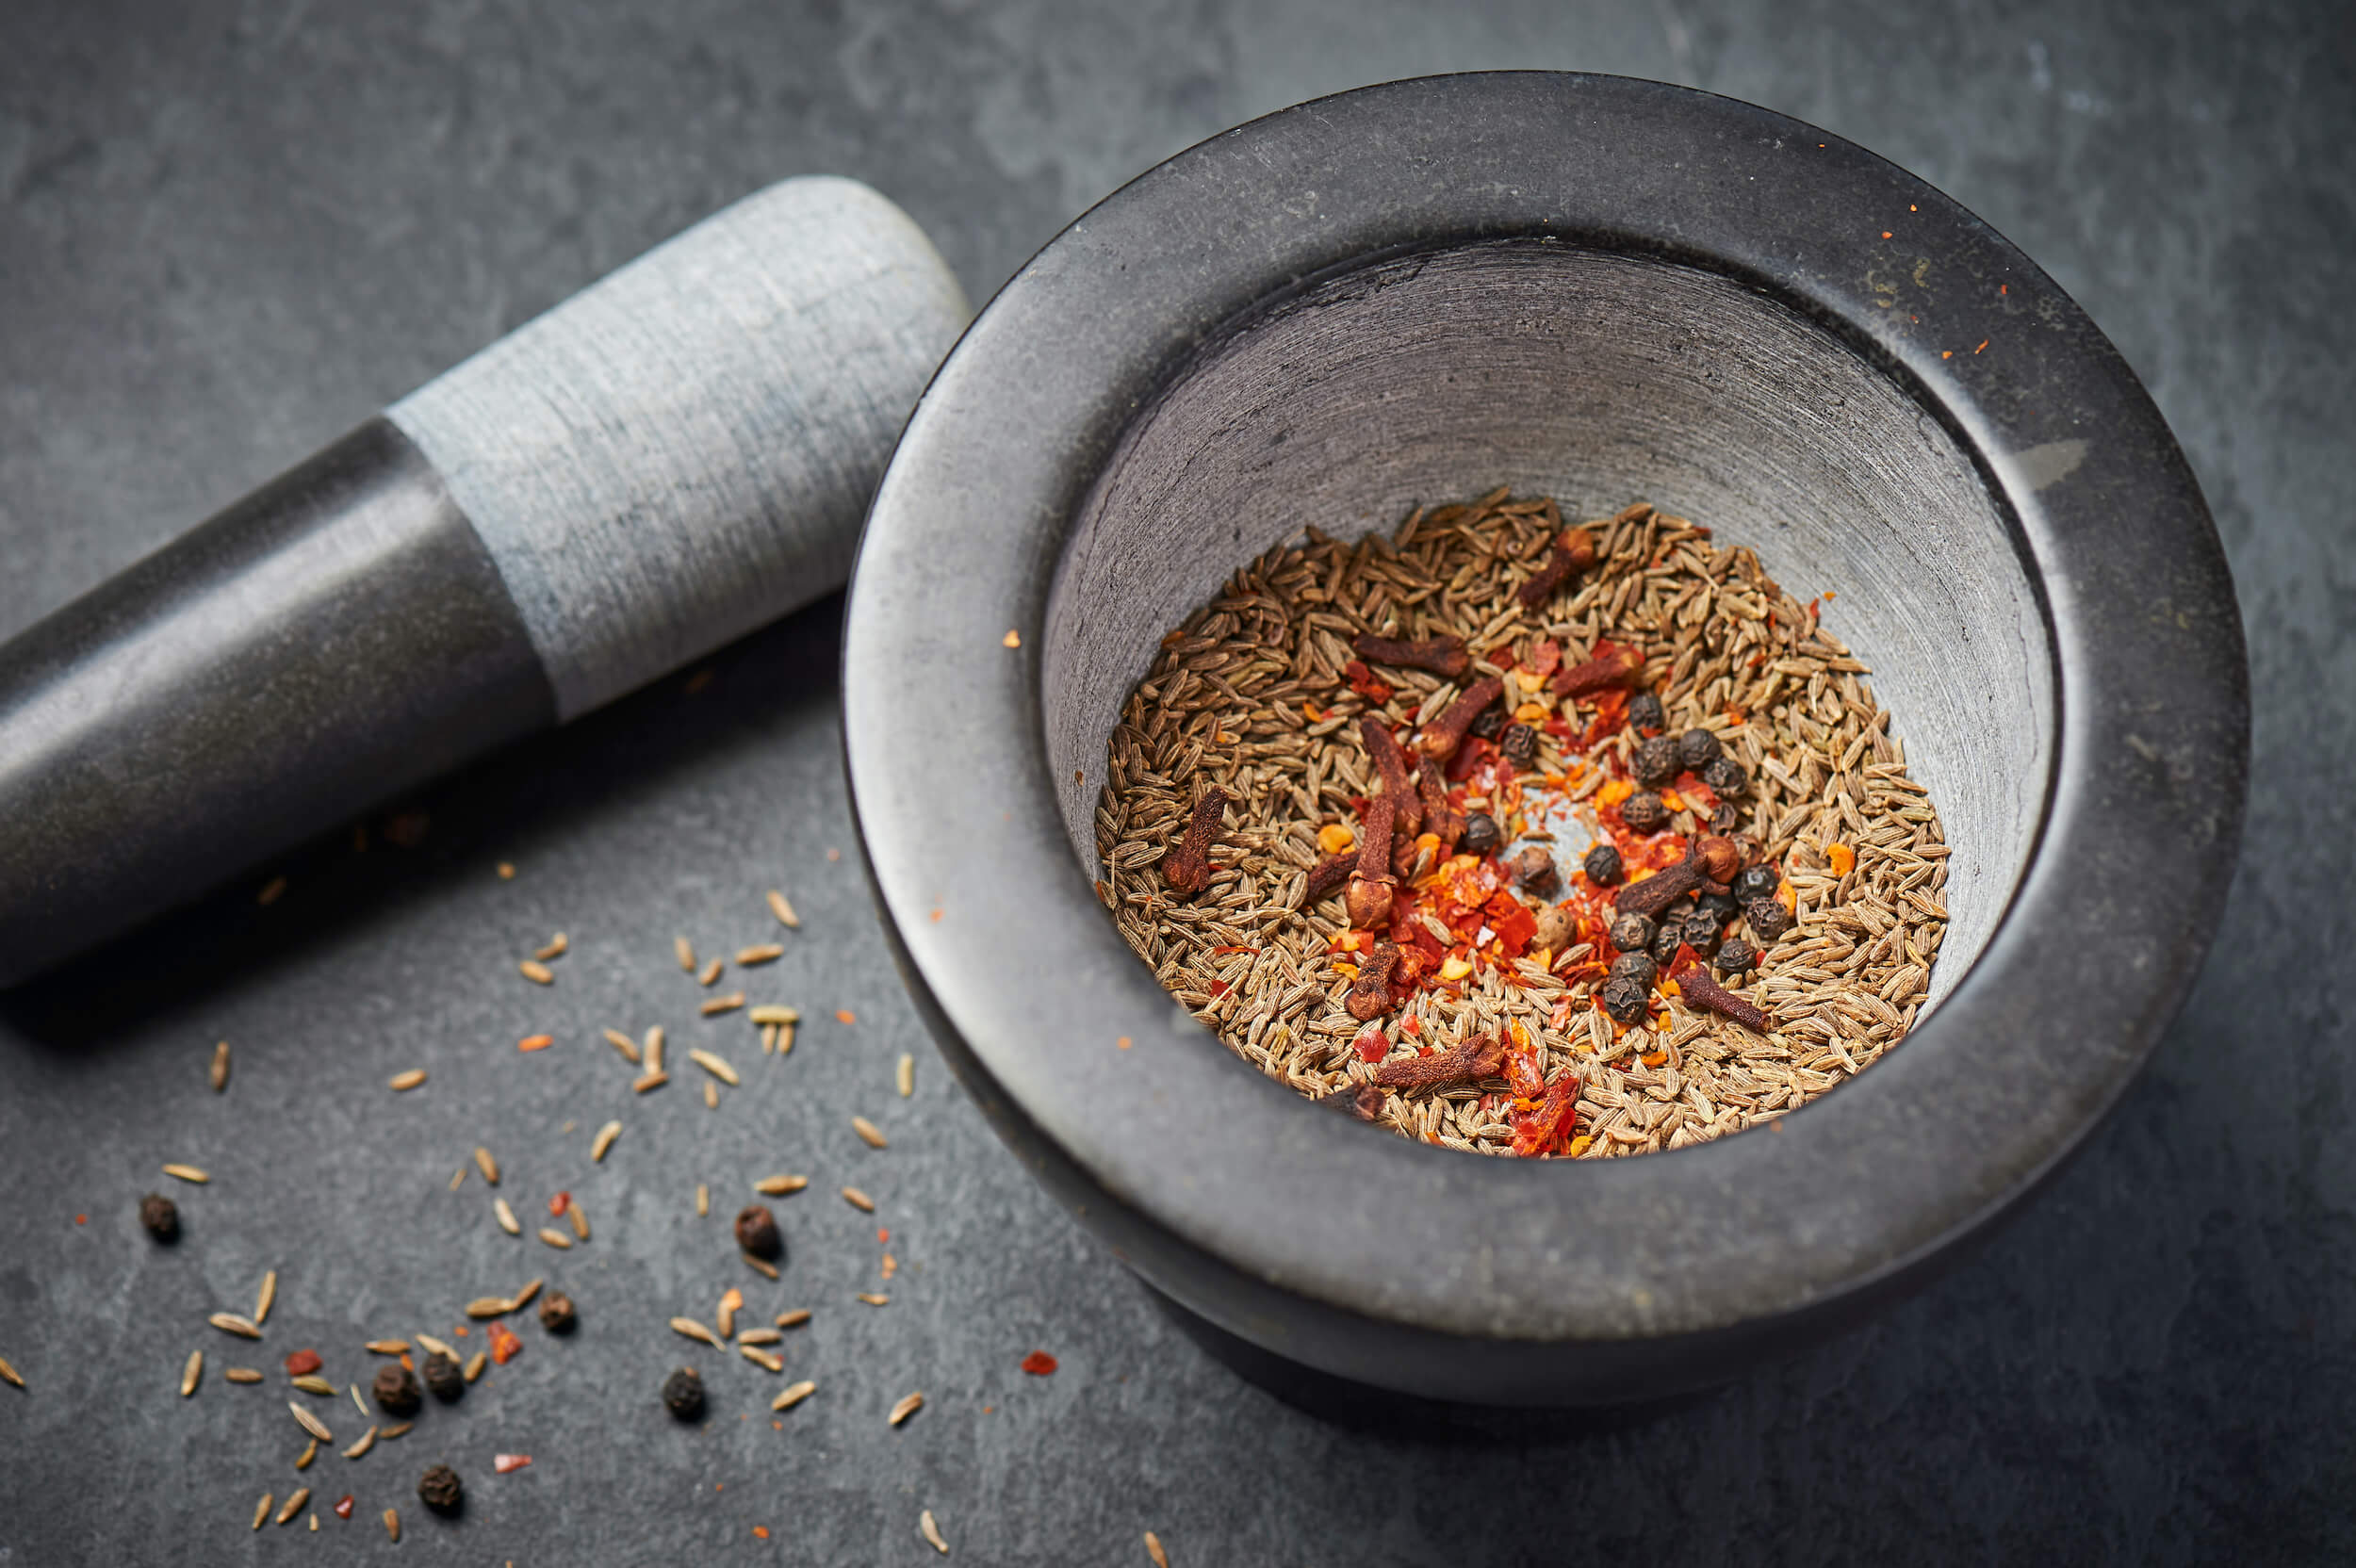 Spiced in a pestle and mortar